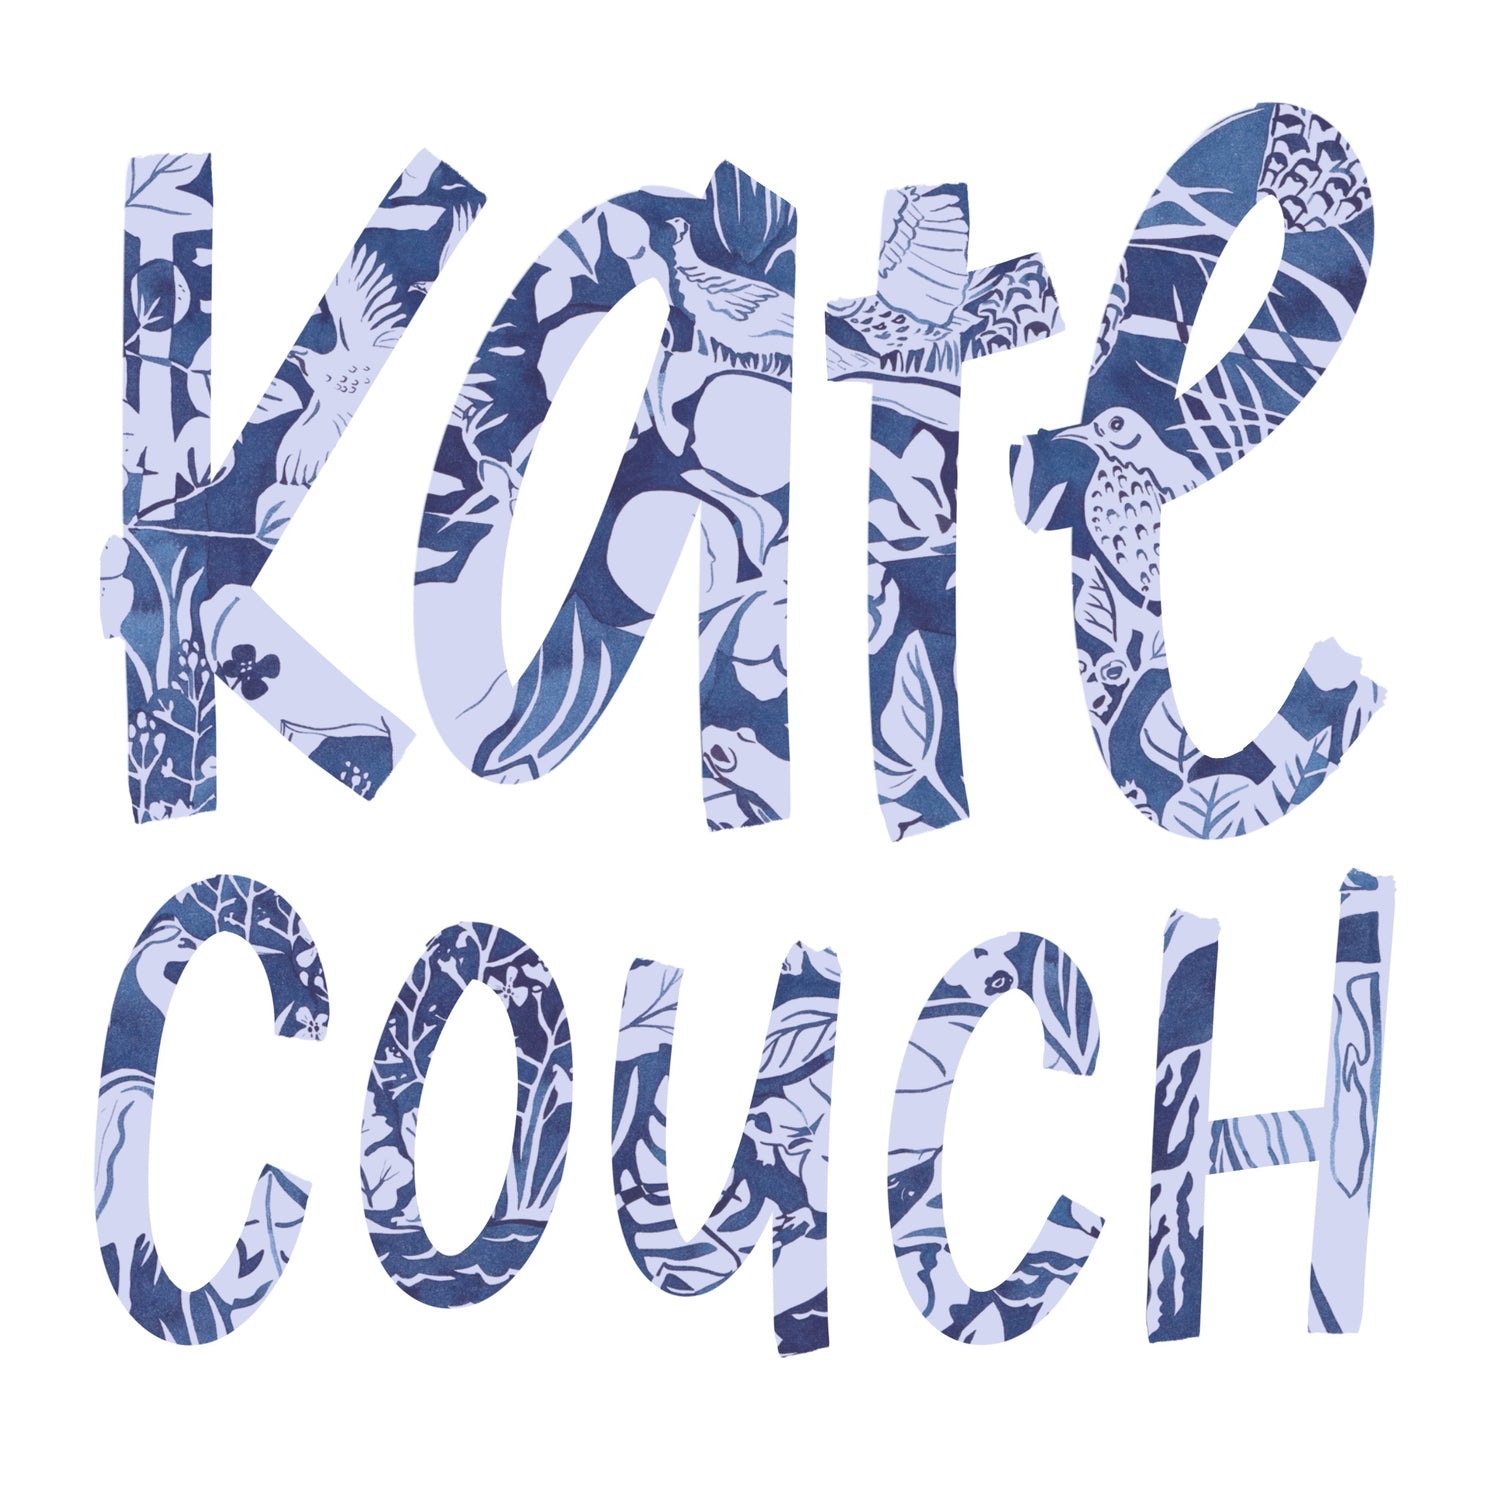 Kate Couch